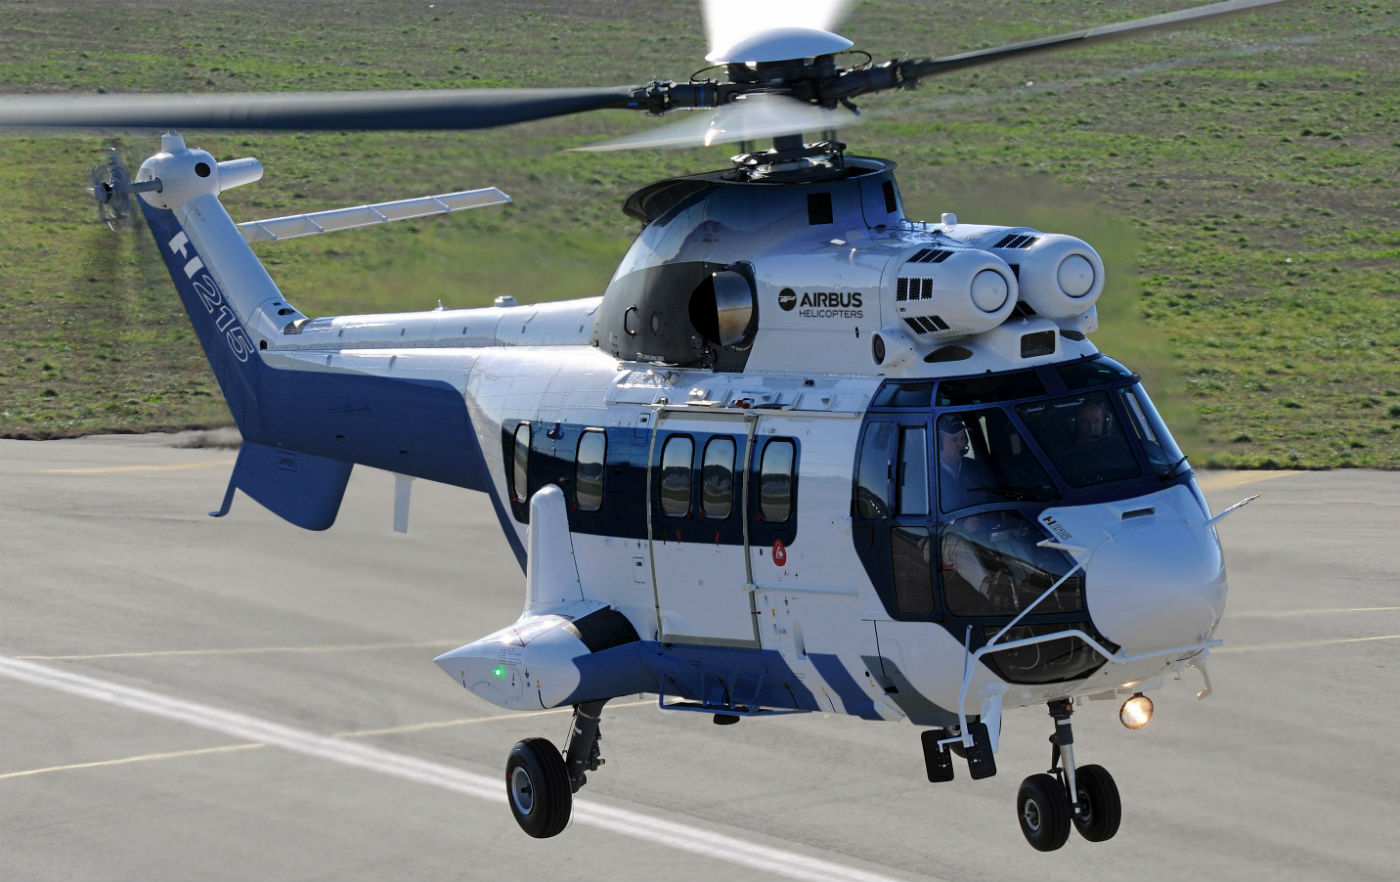 The brand-new H215 will be delivered ahead of the Tokyo 2020 Summer Olympics, and is dedicated for missions including personnel and VIP transportation, material transport, as well as wide area support missions. Airbus Photo